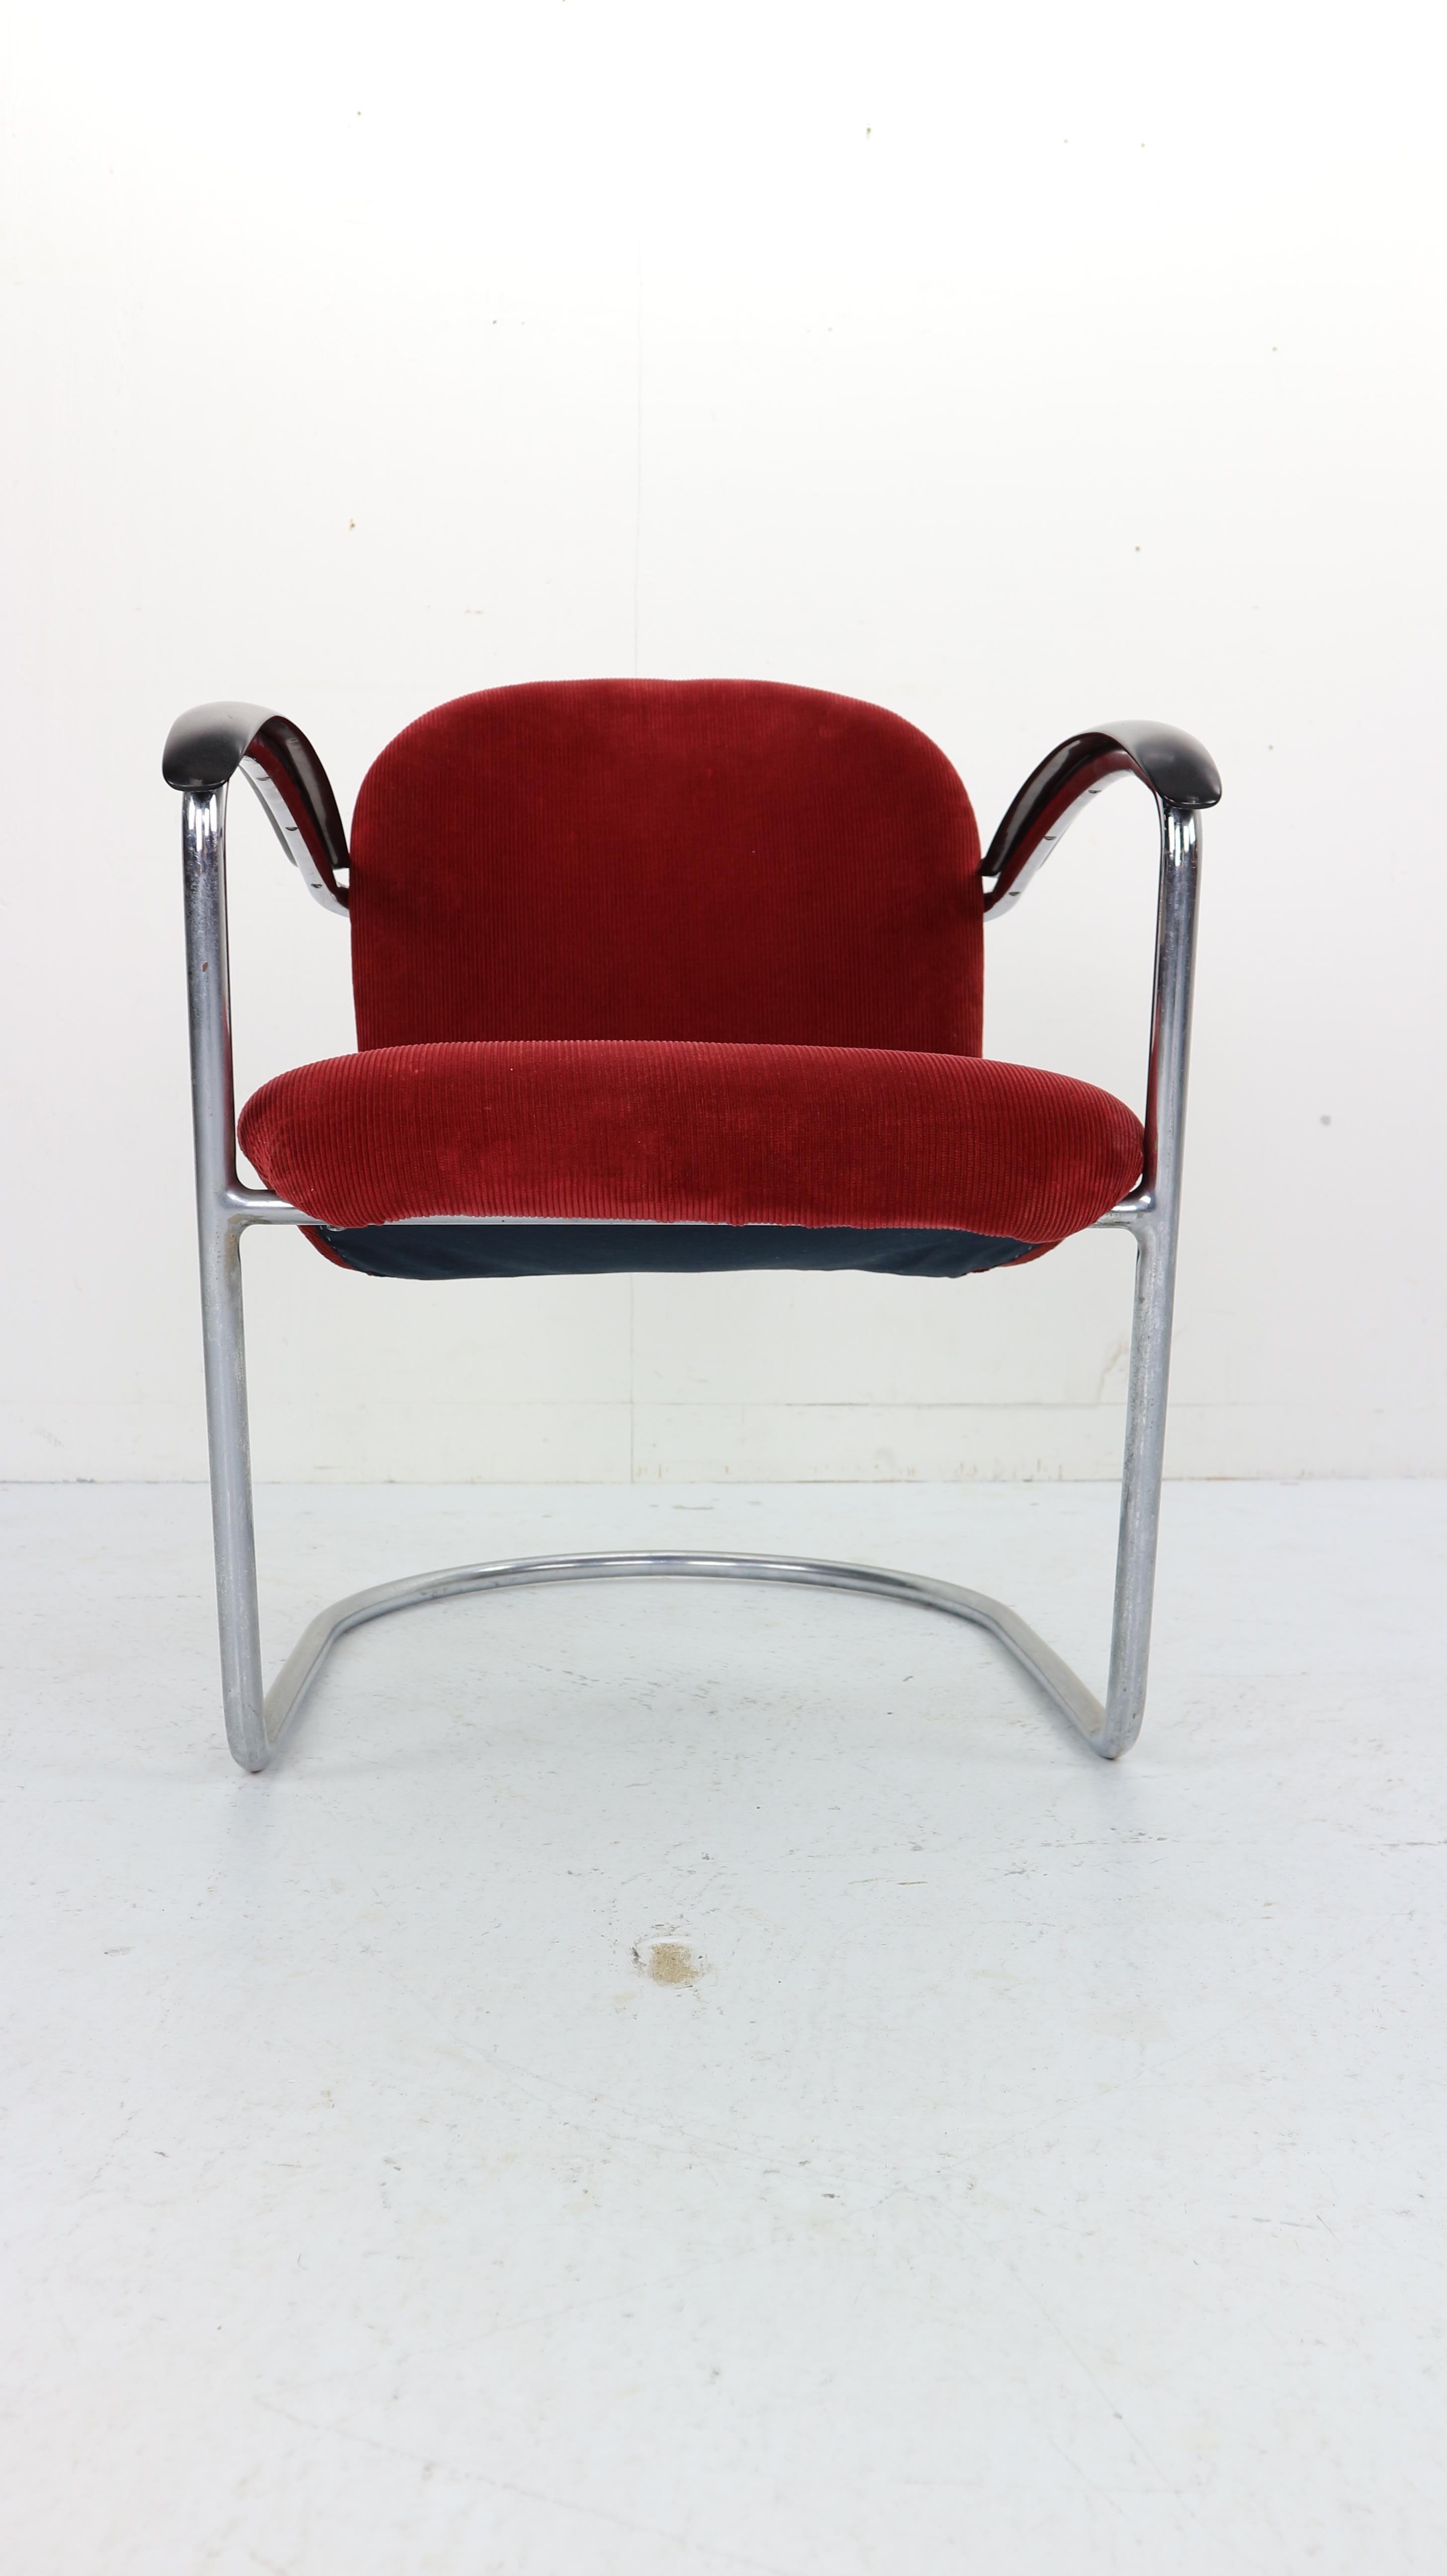 Gispen M-414 Chrome & Red Rib Fabric Easy Lounge, Armchair by W.H. Gispen, 1935 In Good Condition In The Hague, NL